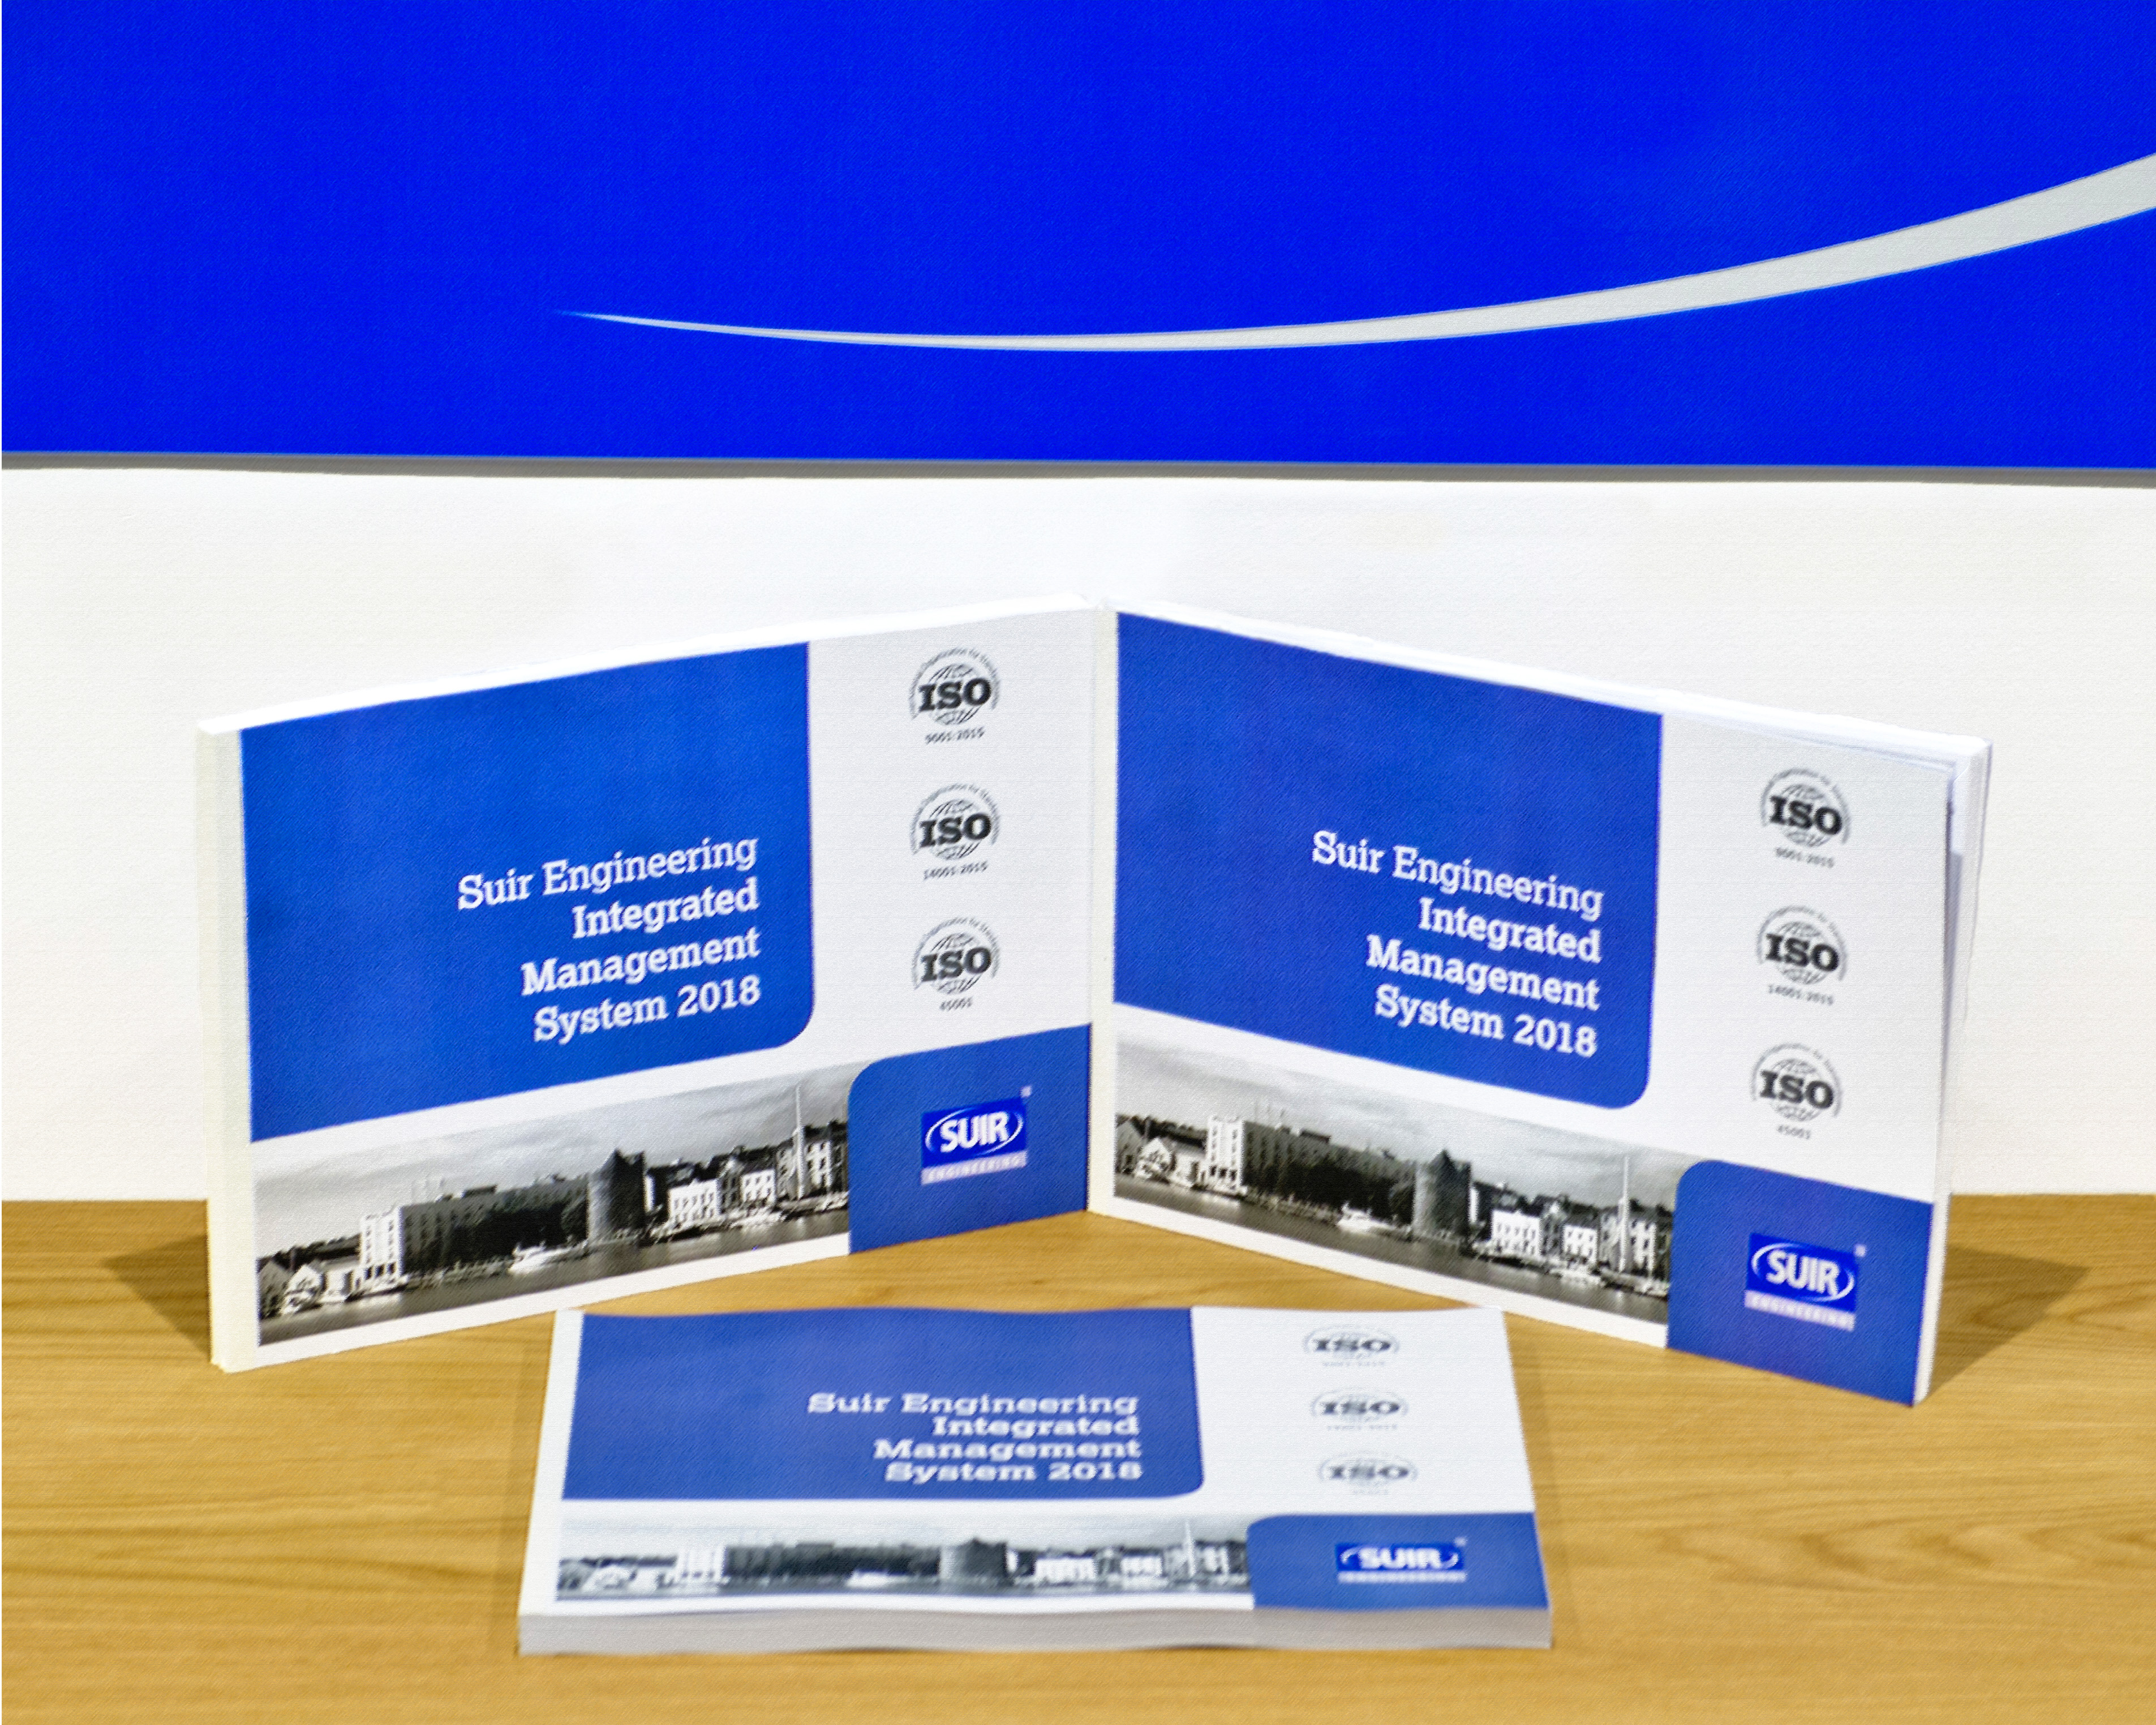 Suir engineering integrated management system booklets